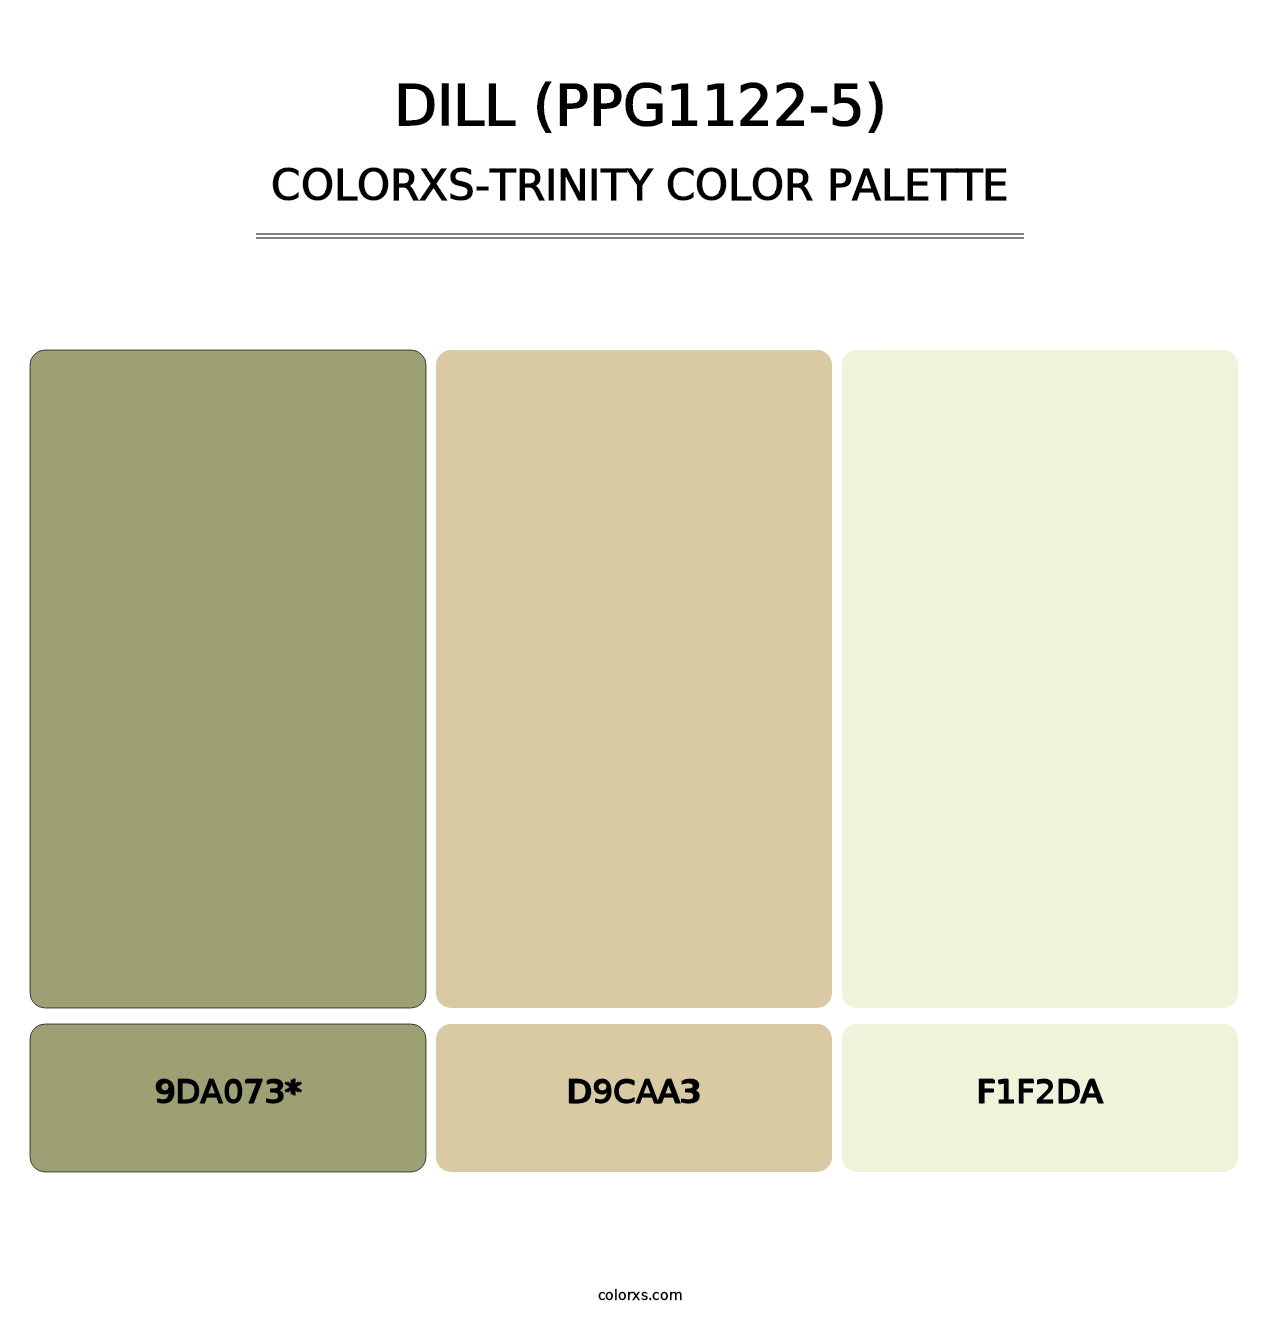 Dill (PPG1122-5) - Colorxs Trinity Palette